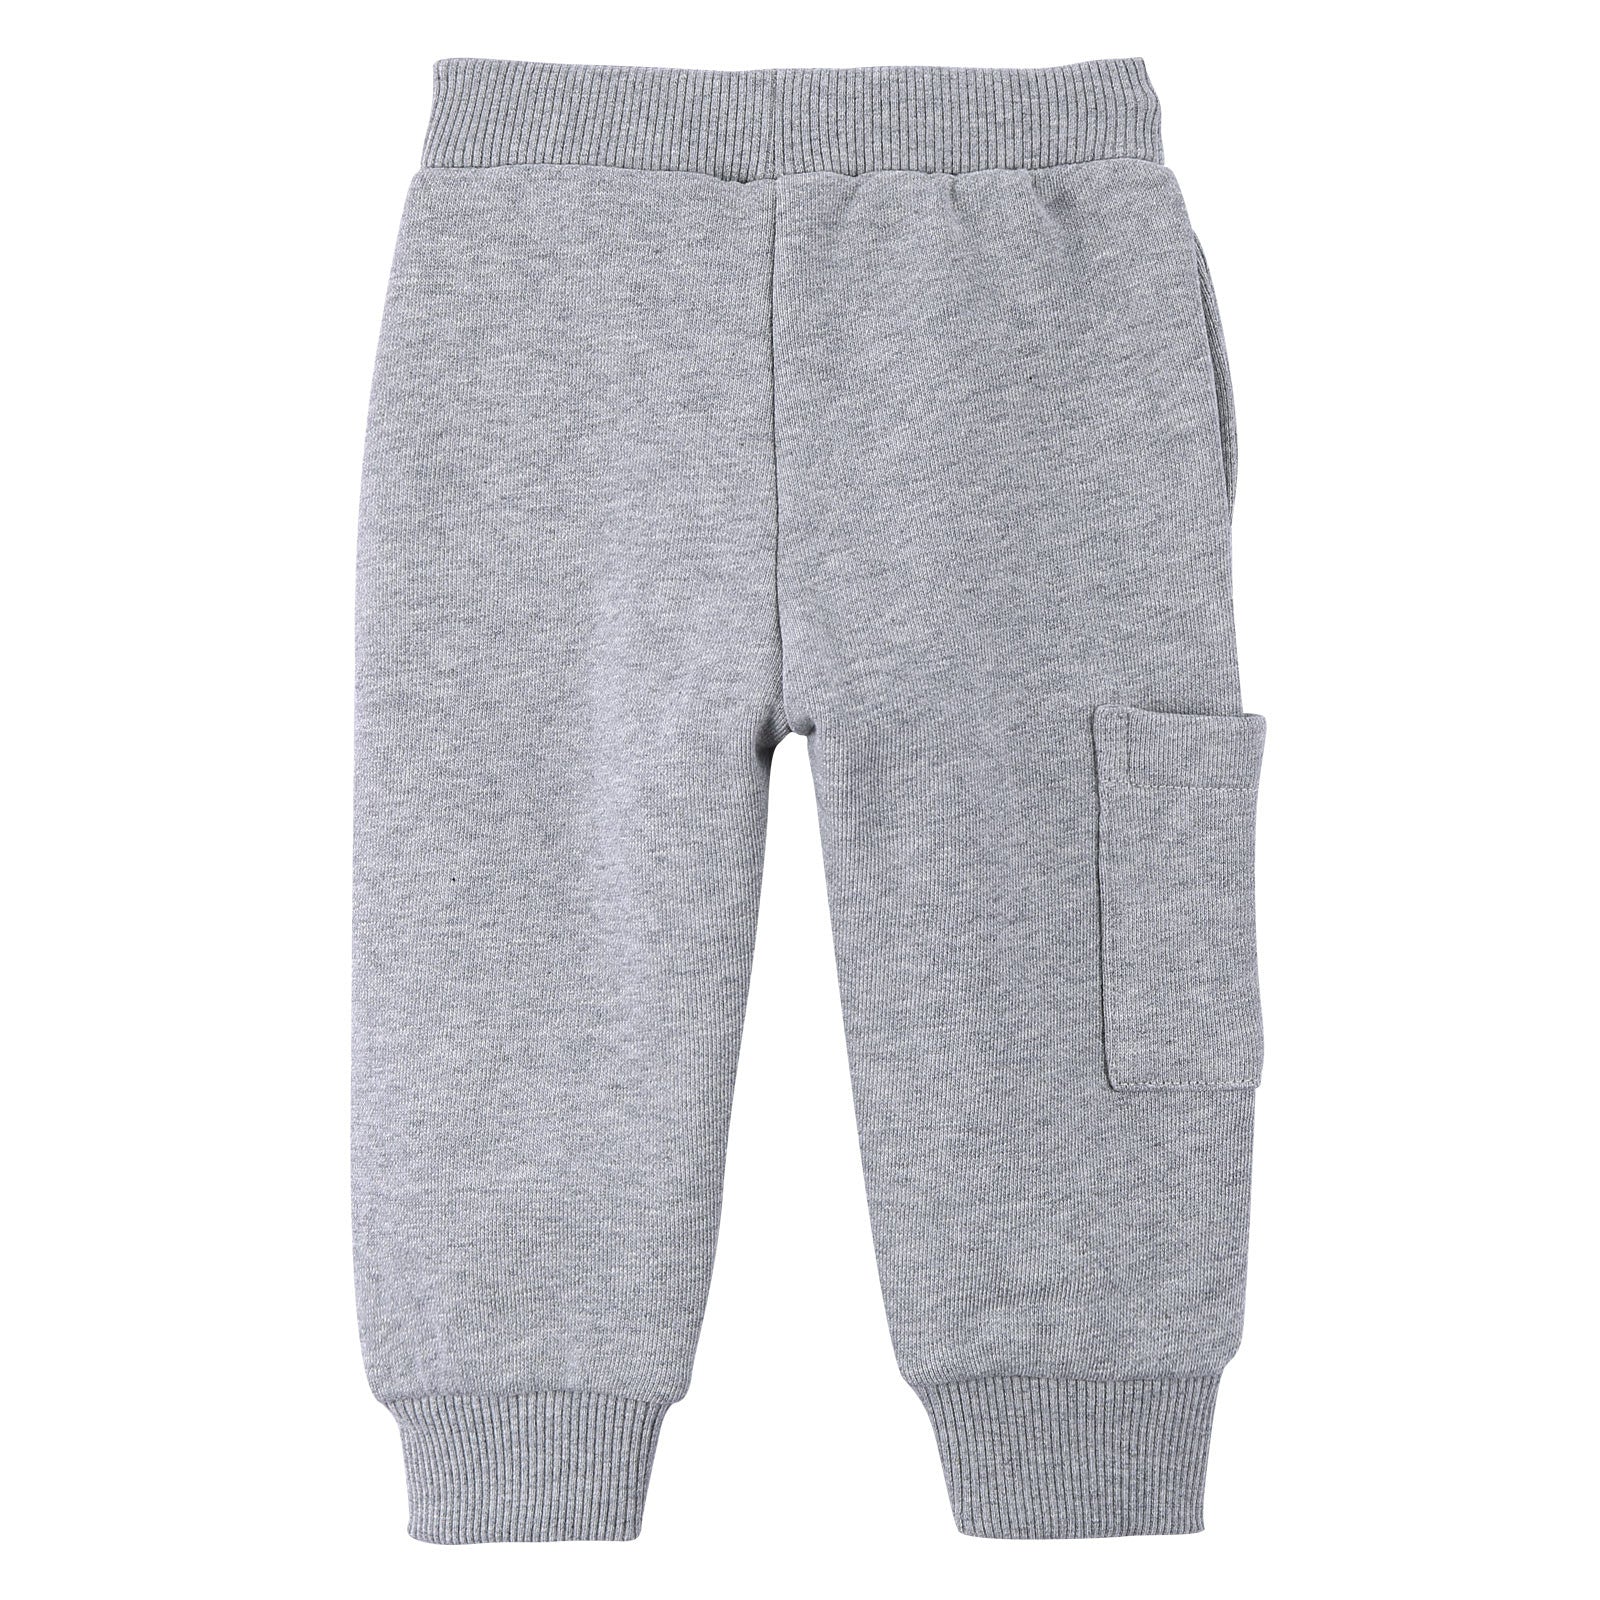 Baby Boys Grey Cotton Trousers With Patch Pockets - CÉMAROSE | Children's Fashion Store - 2